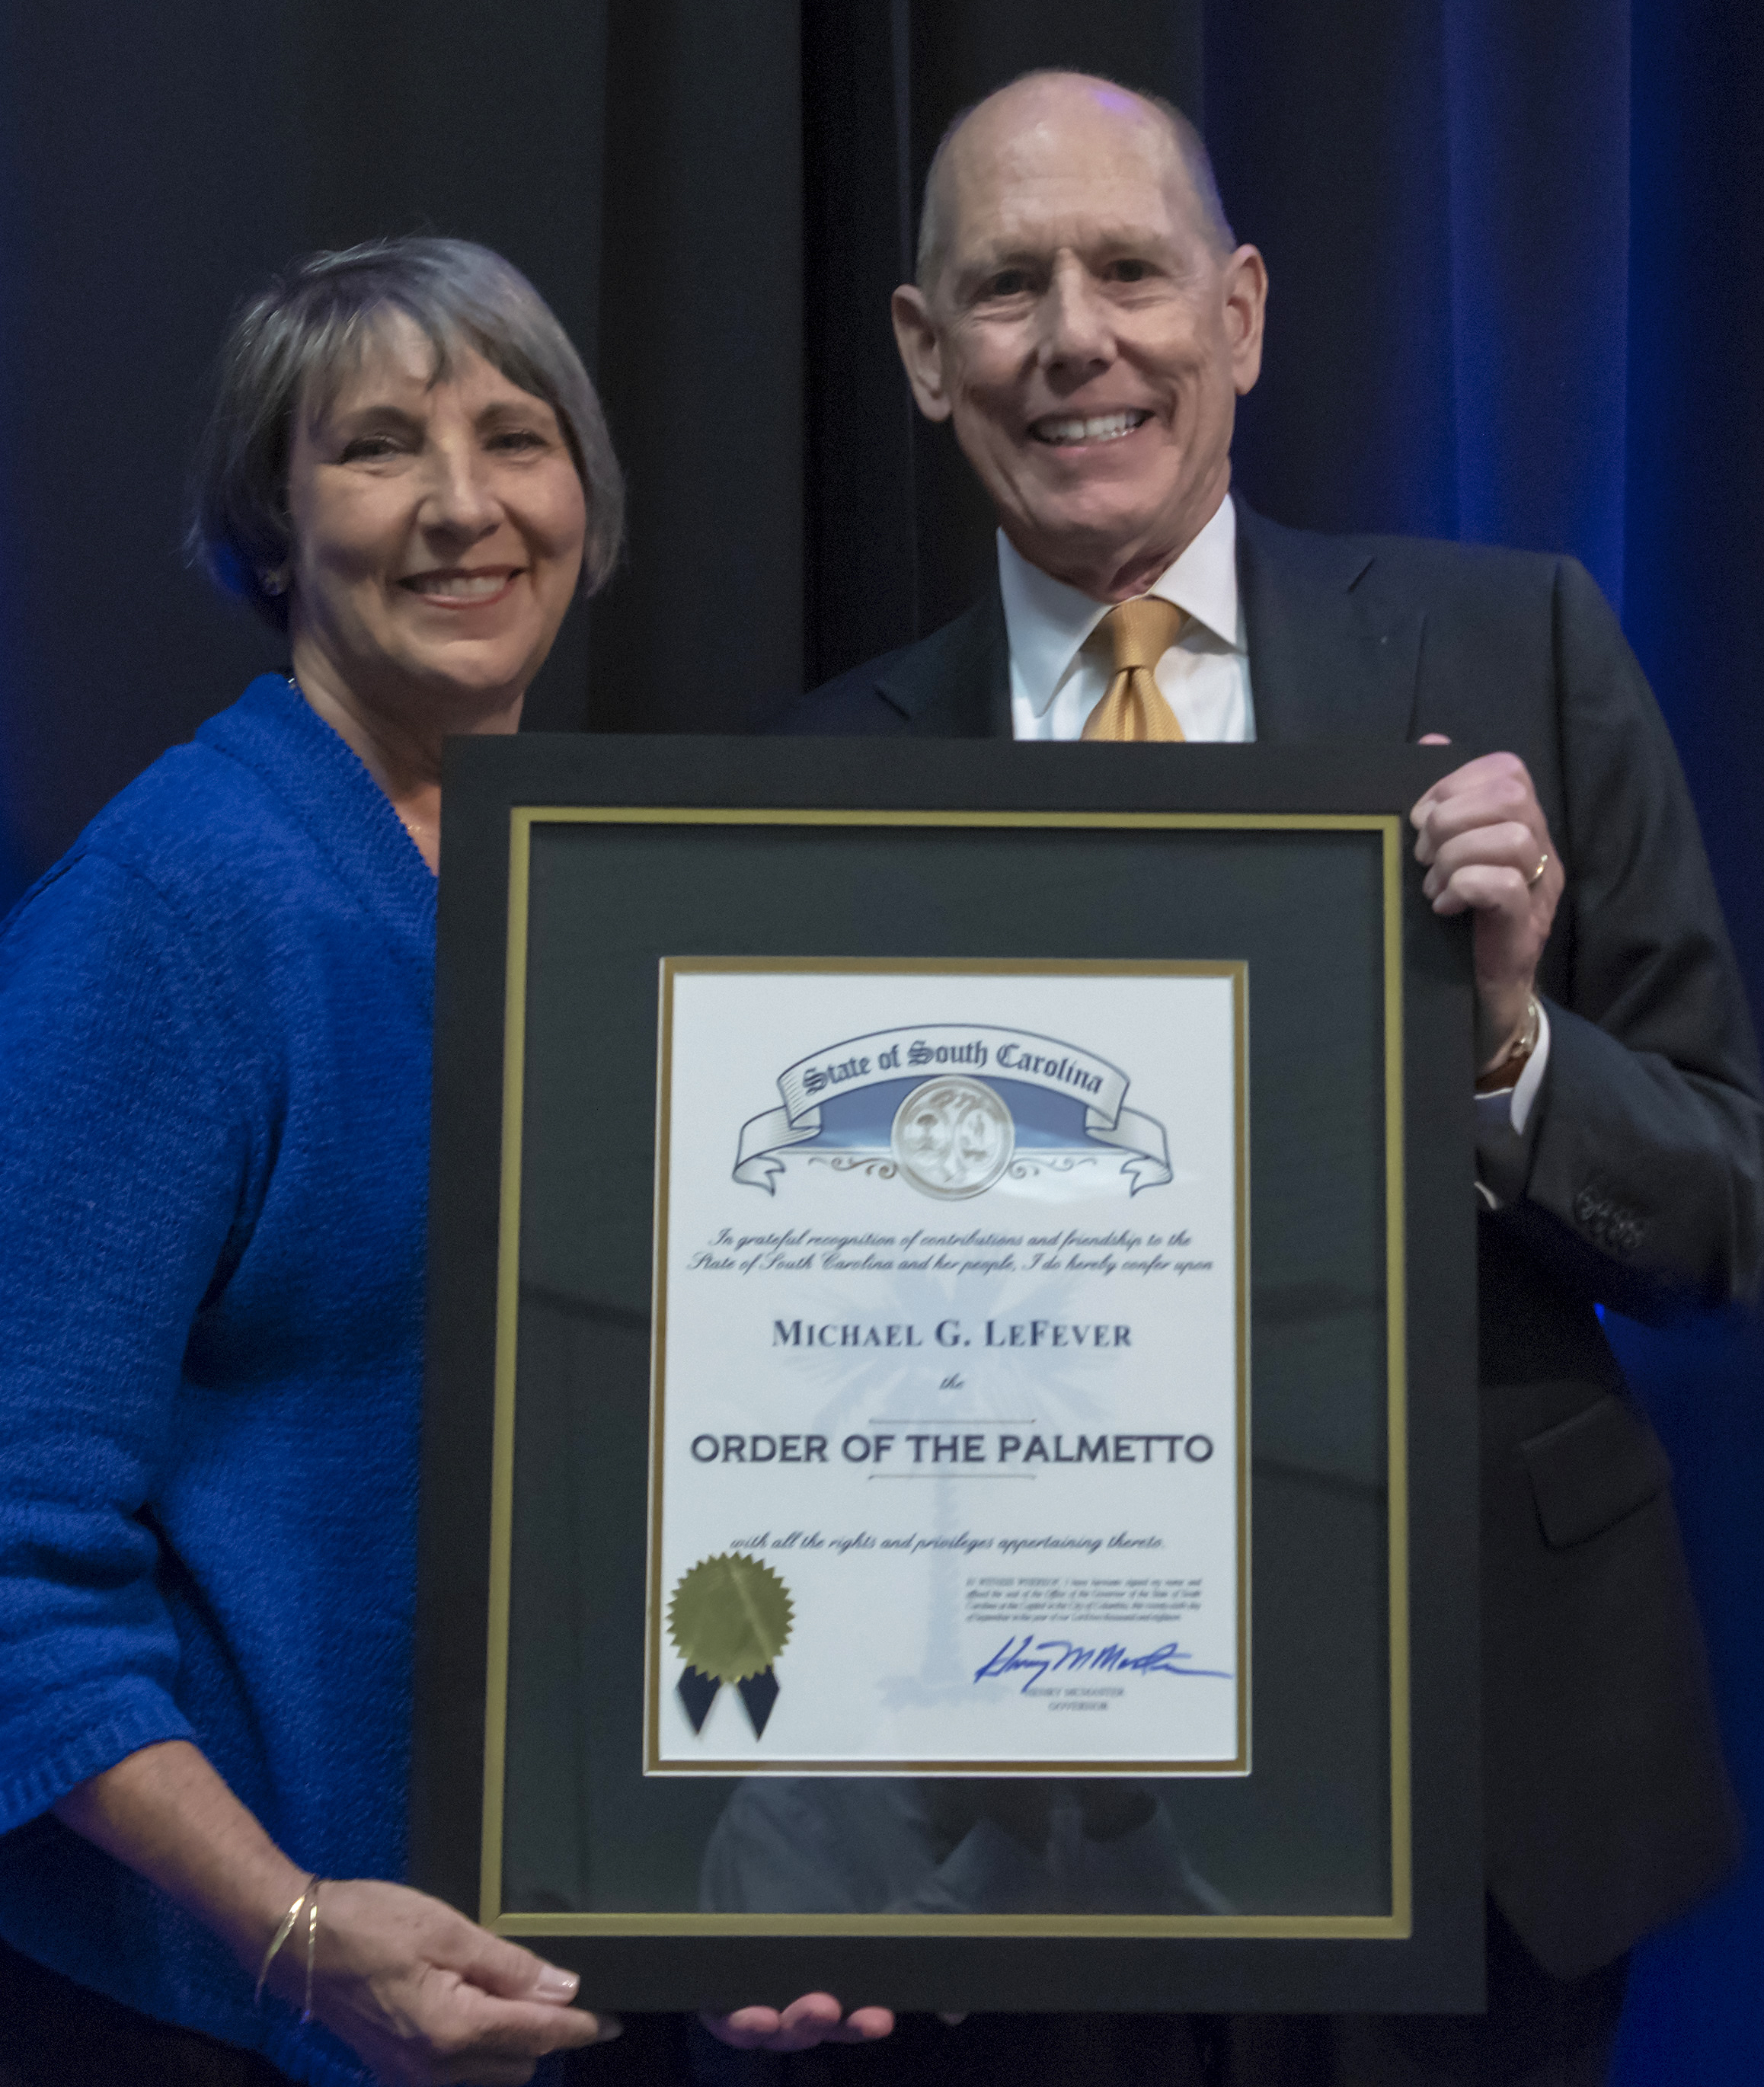 Mike LeFever, former SCICU President & CEO, has been awarded the Order of the Palmetto.